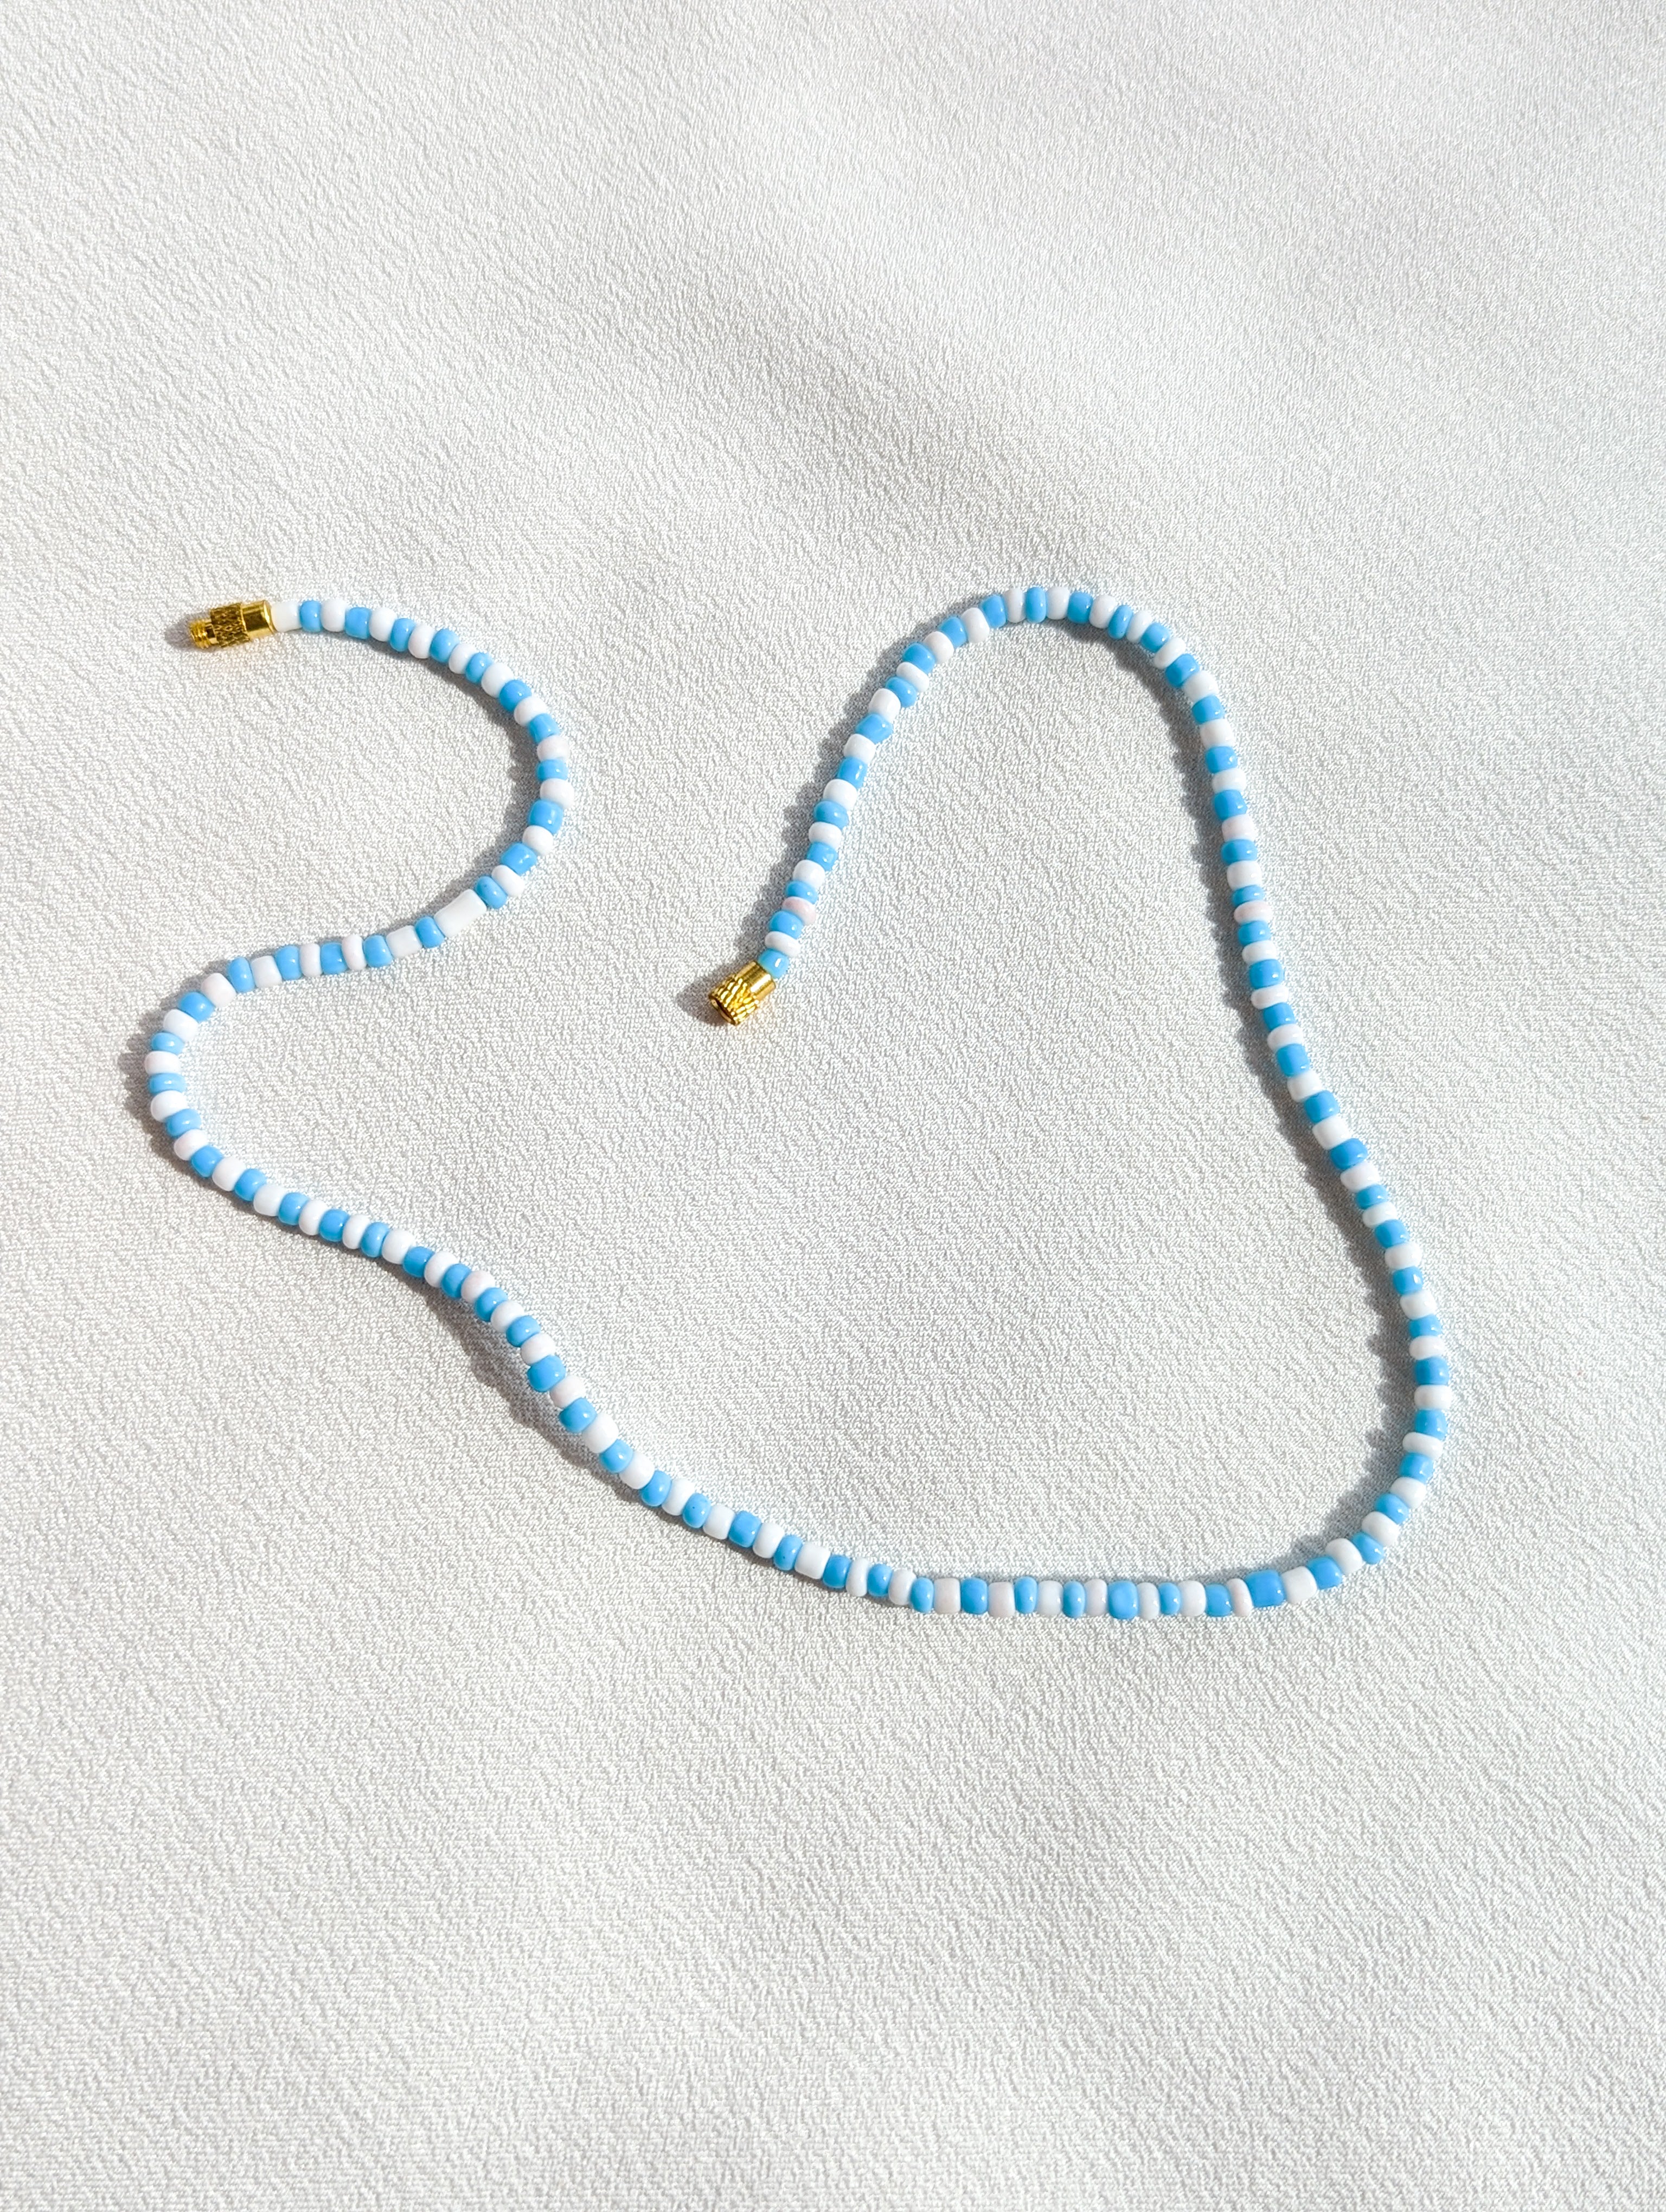 [THE TWO] Necklace: Blue/White [Small Beads]